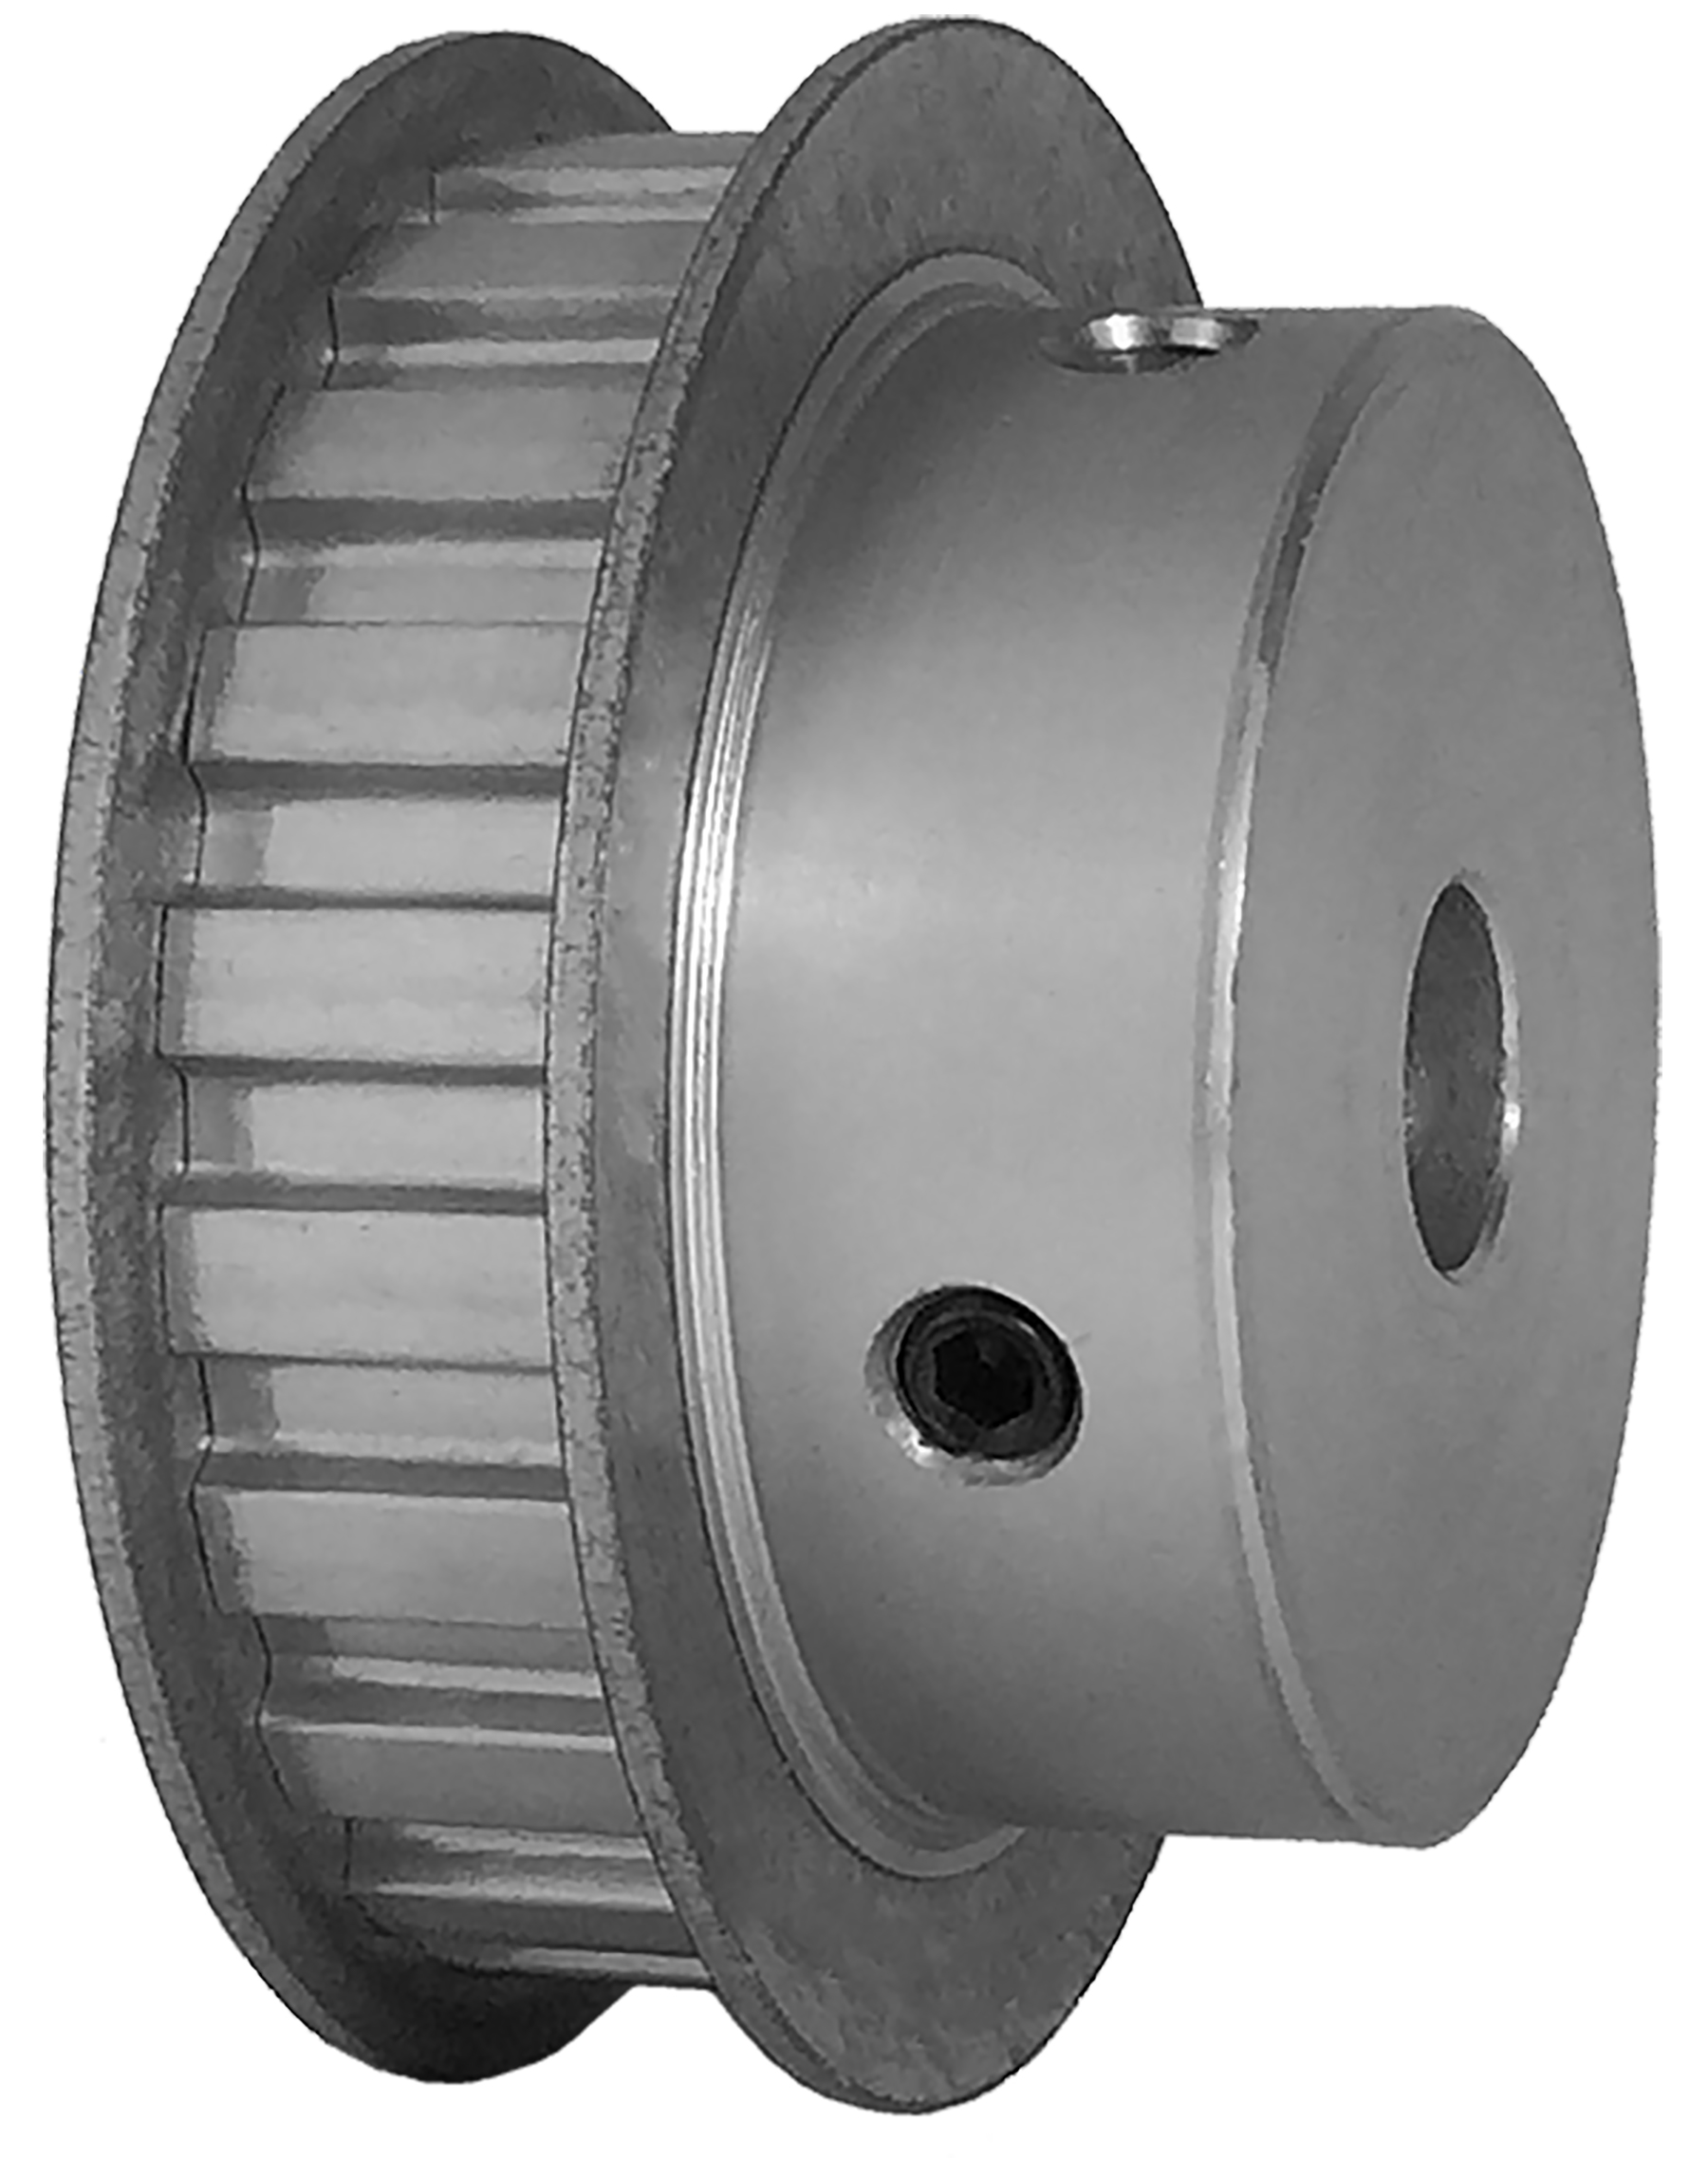 21L050-6FA6 - Aluminum Imperial Pitch Pulleys